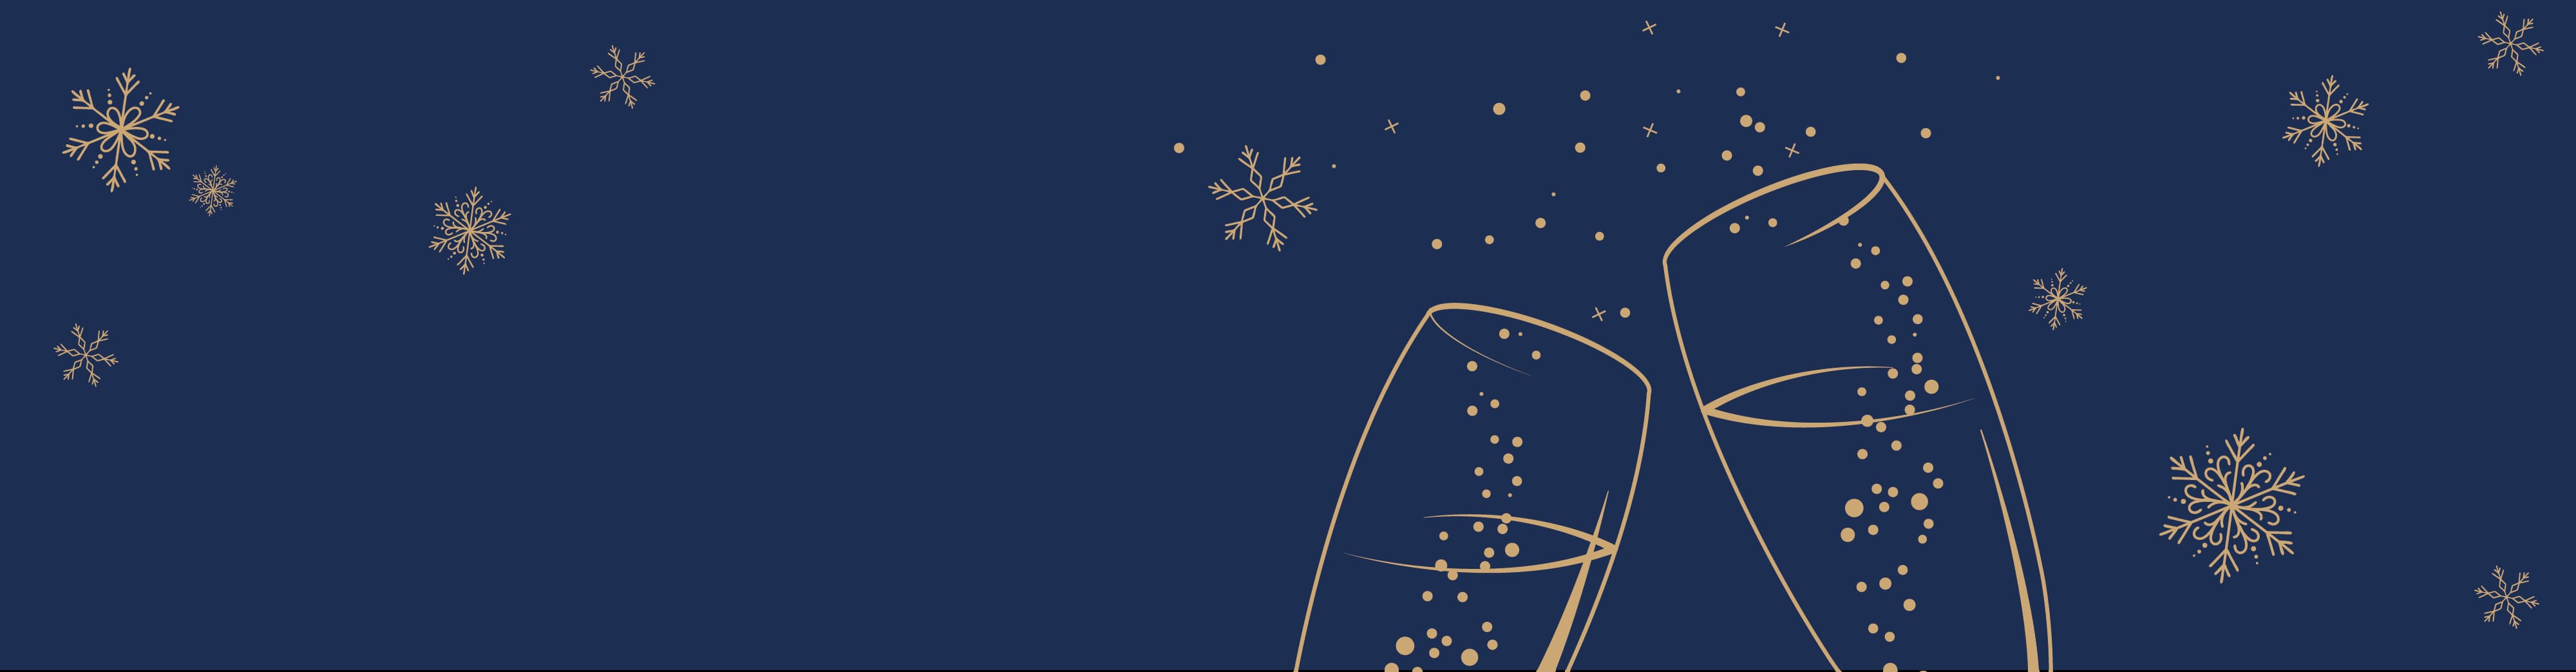 New Years decorated background with stars